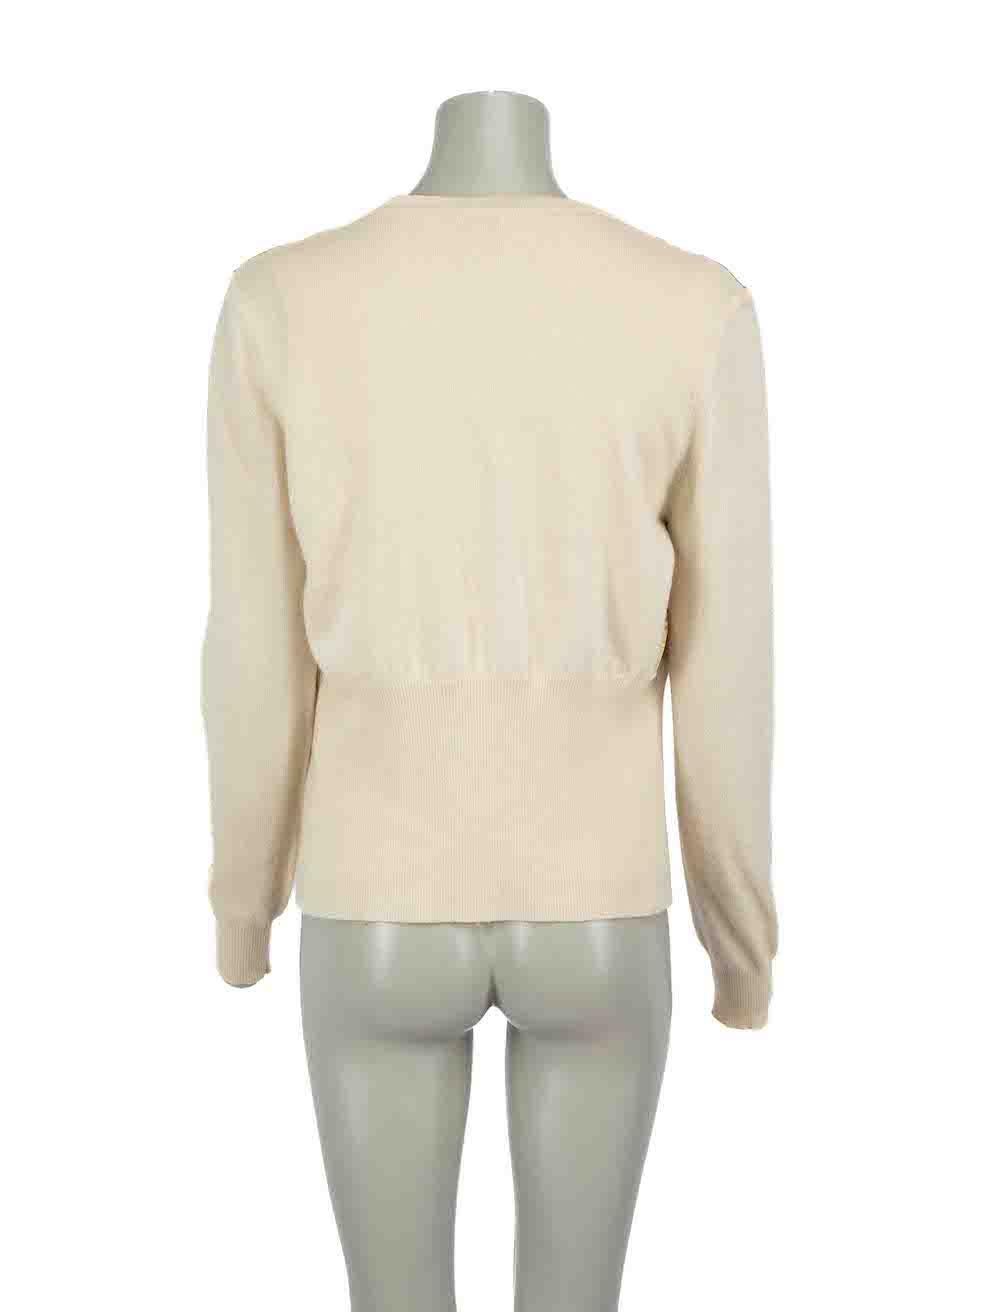 Valentino Beige Chain Panel Top & Cardigan Set Size L In Good Condition For Sale In London, GB